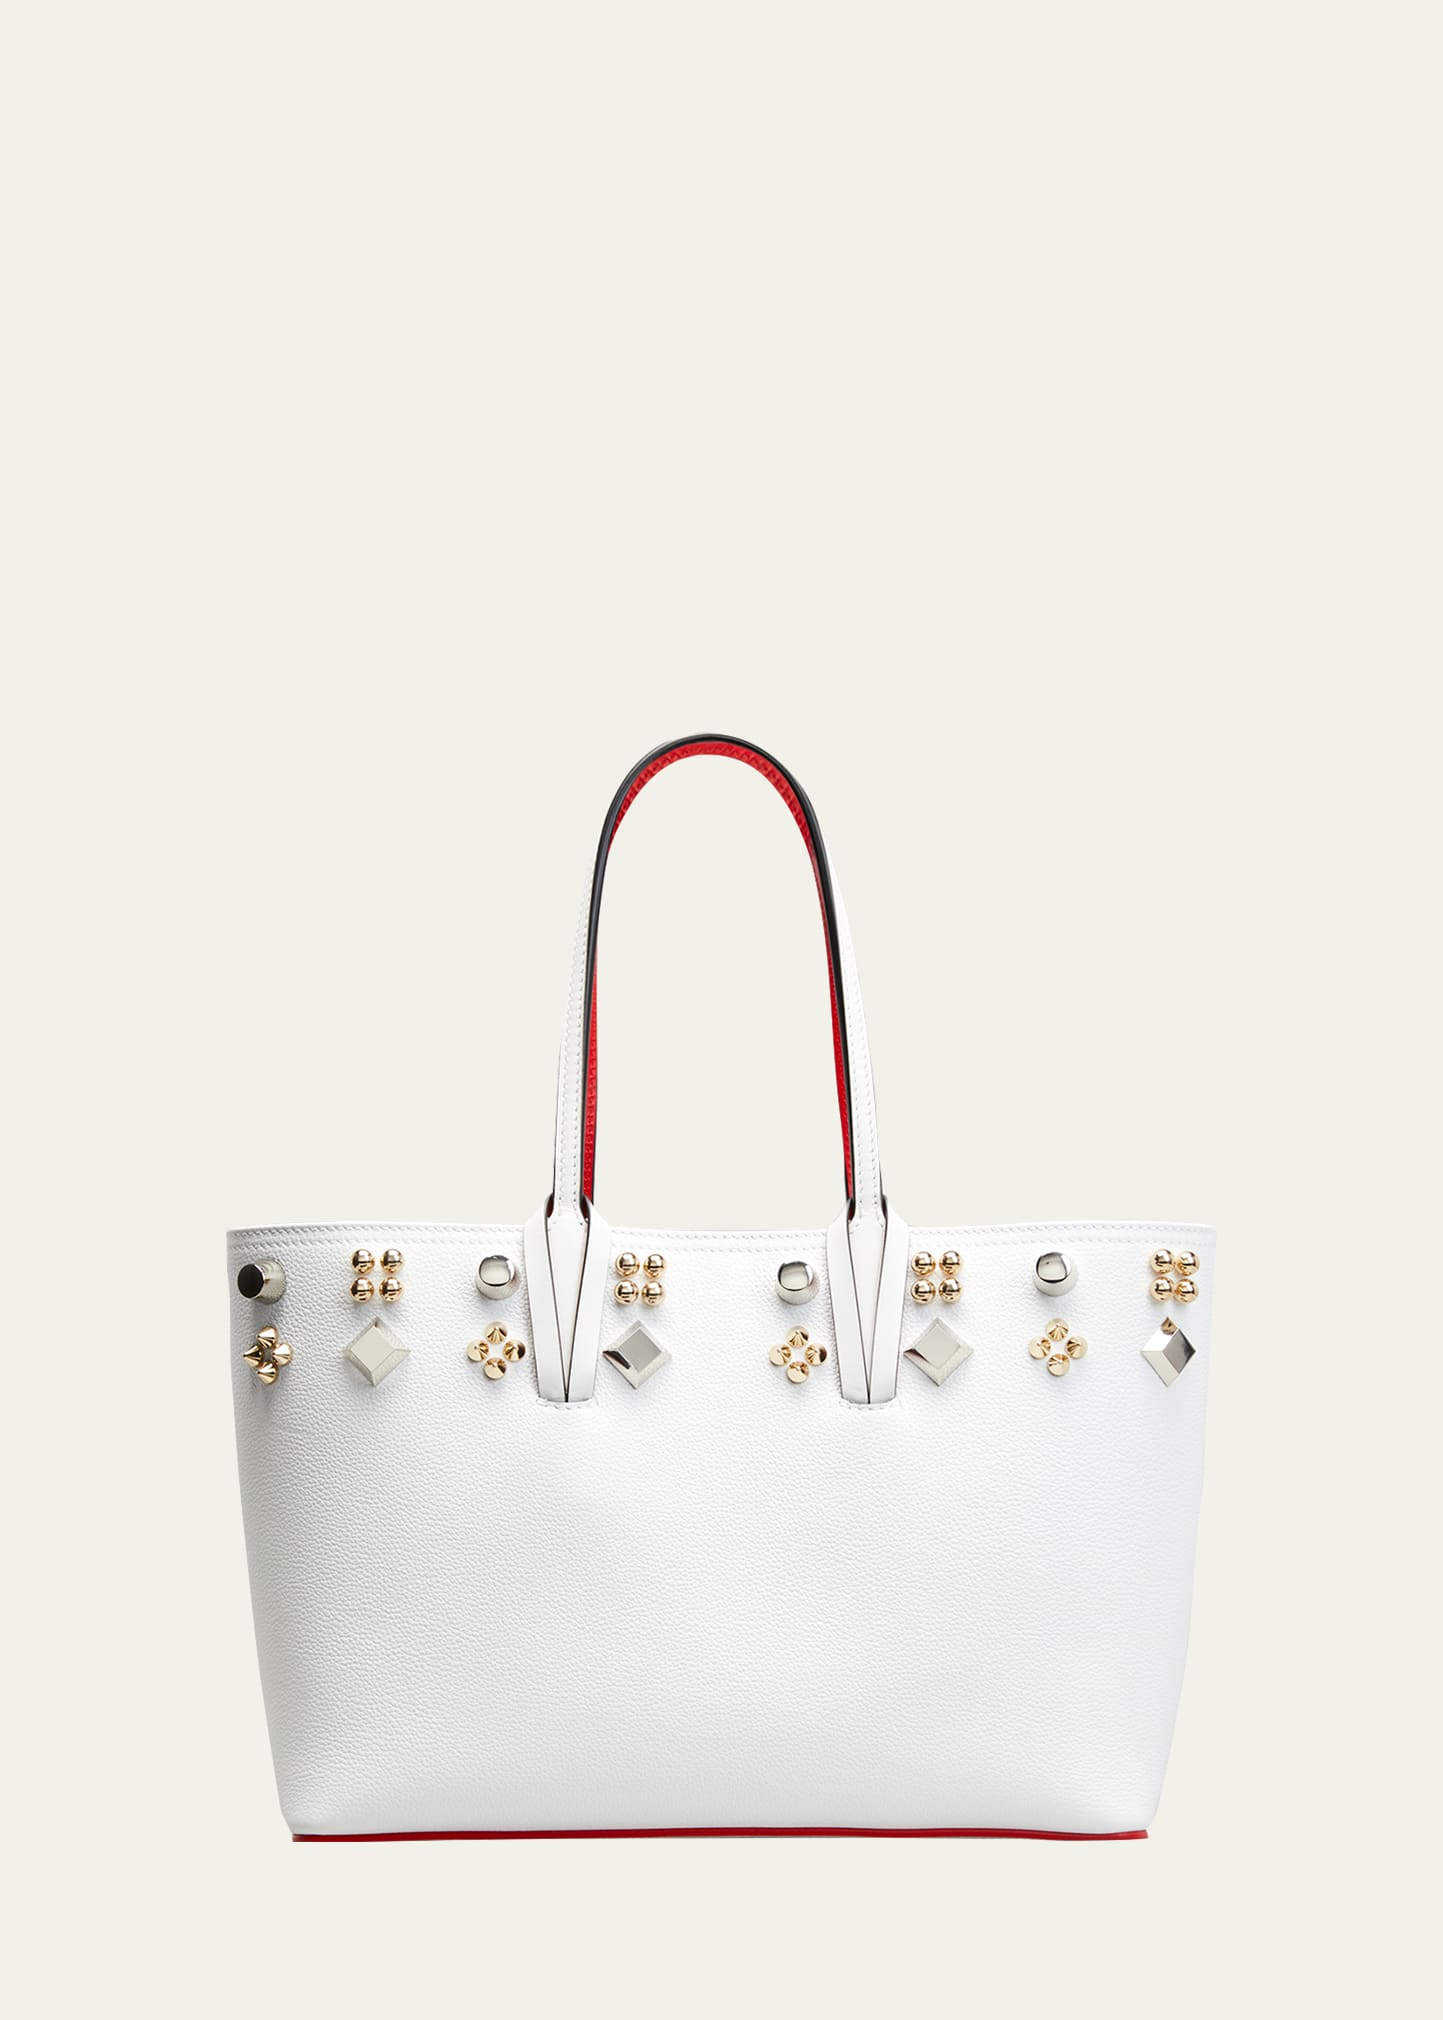 CHRISTIAN LOUBOUTIN CABATA SMALL EMPIRE SPIKES LEATHER TOTE BAG